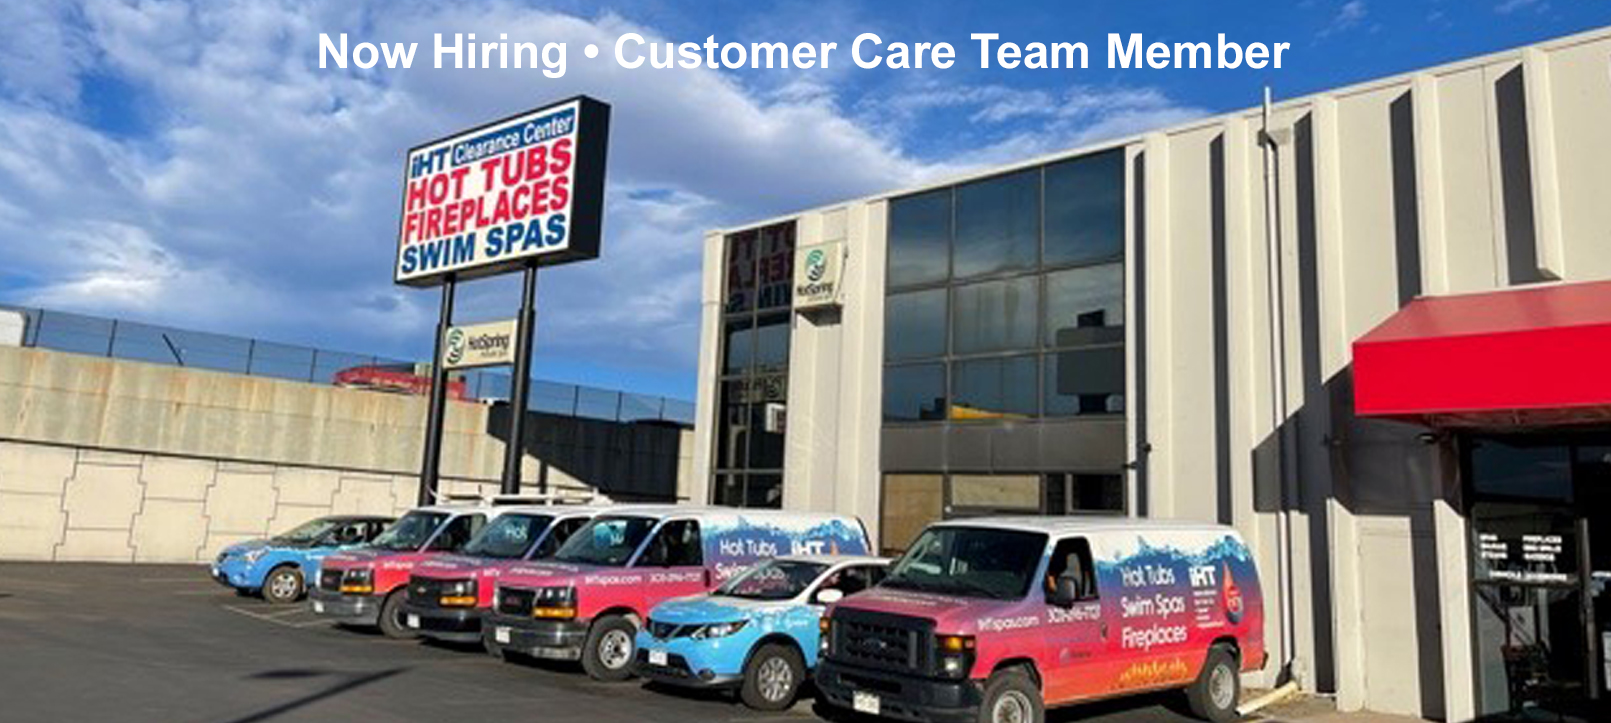 Customer Care now hiring career positions